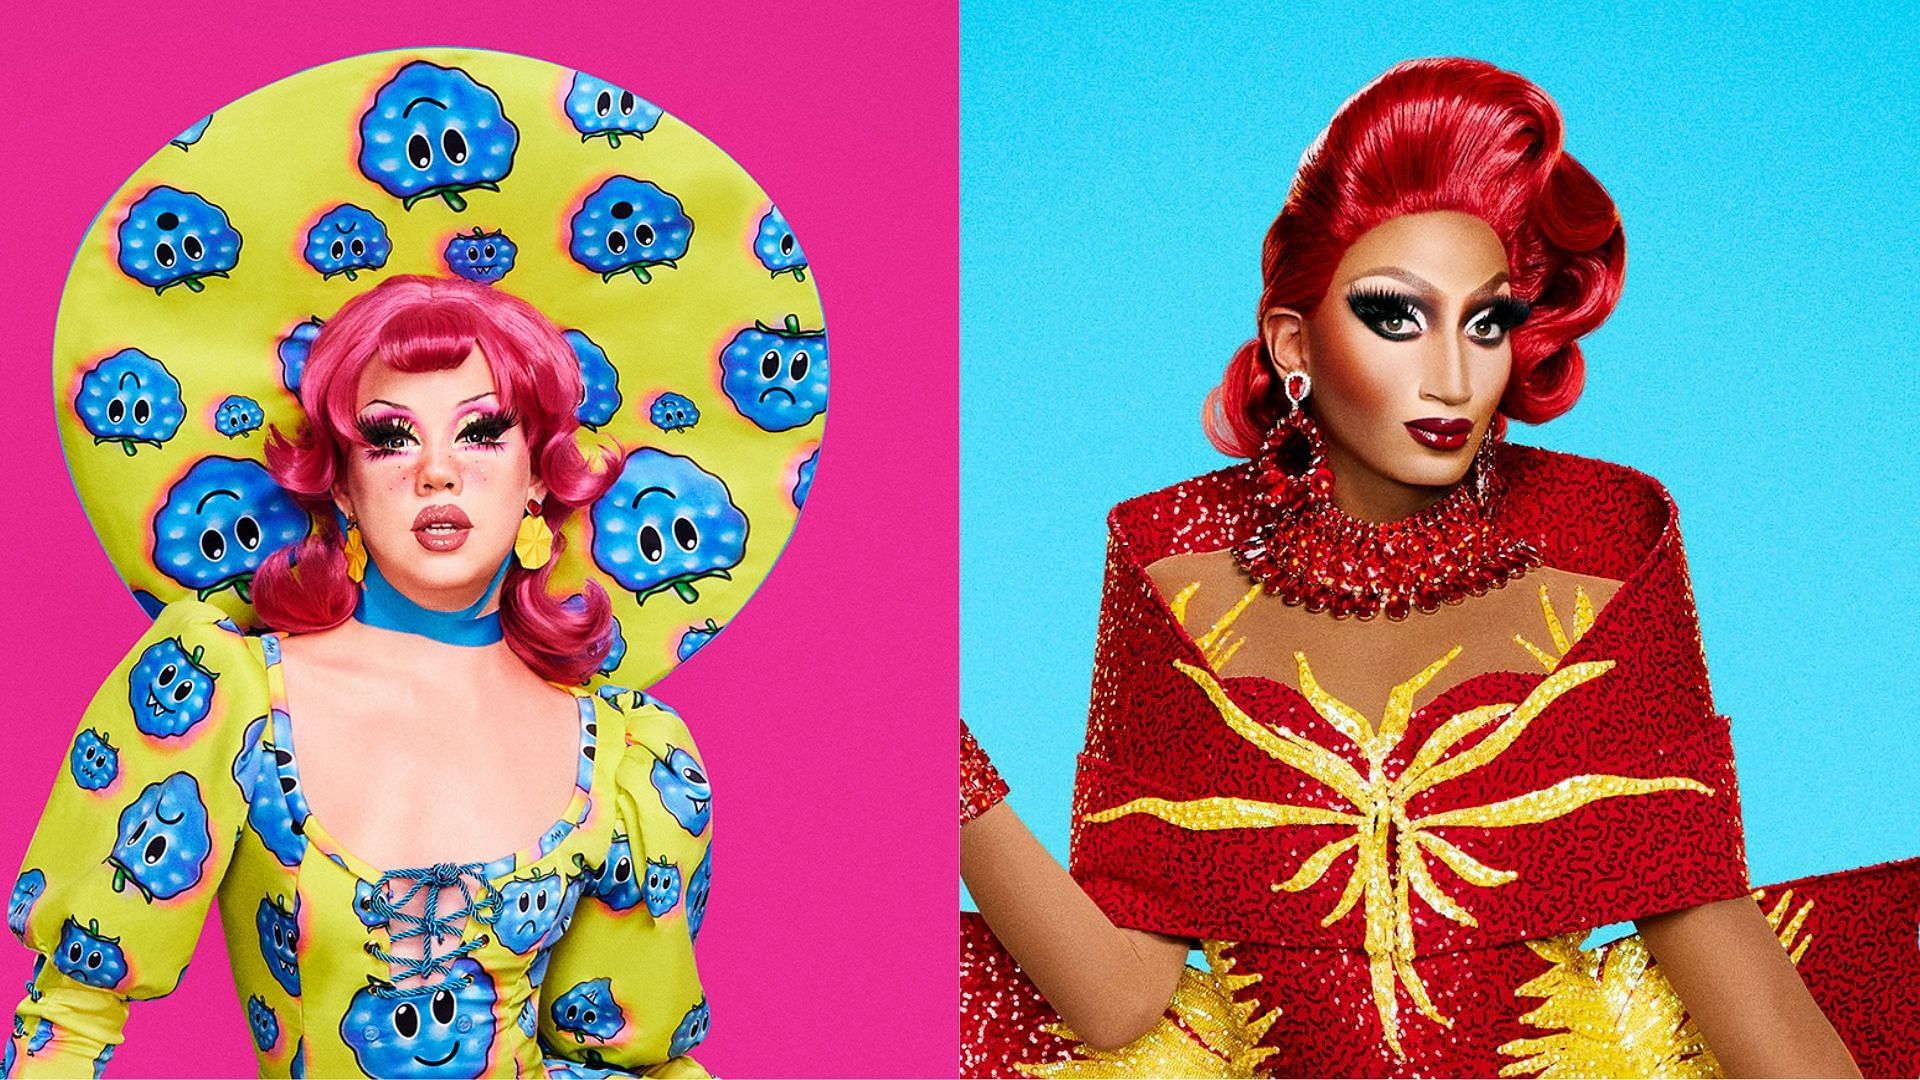 Willow Pill and Angeria Paris VanMicheals from RuPaul&rsquo;s Drag Race (Image via RuPaulsDragRace/Twitter)